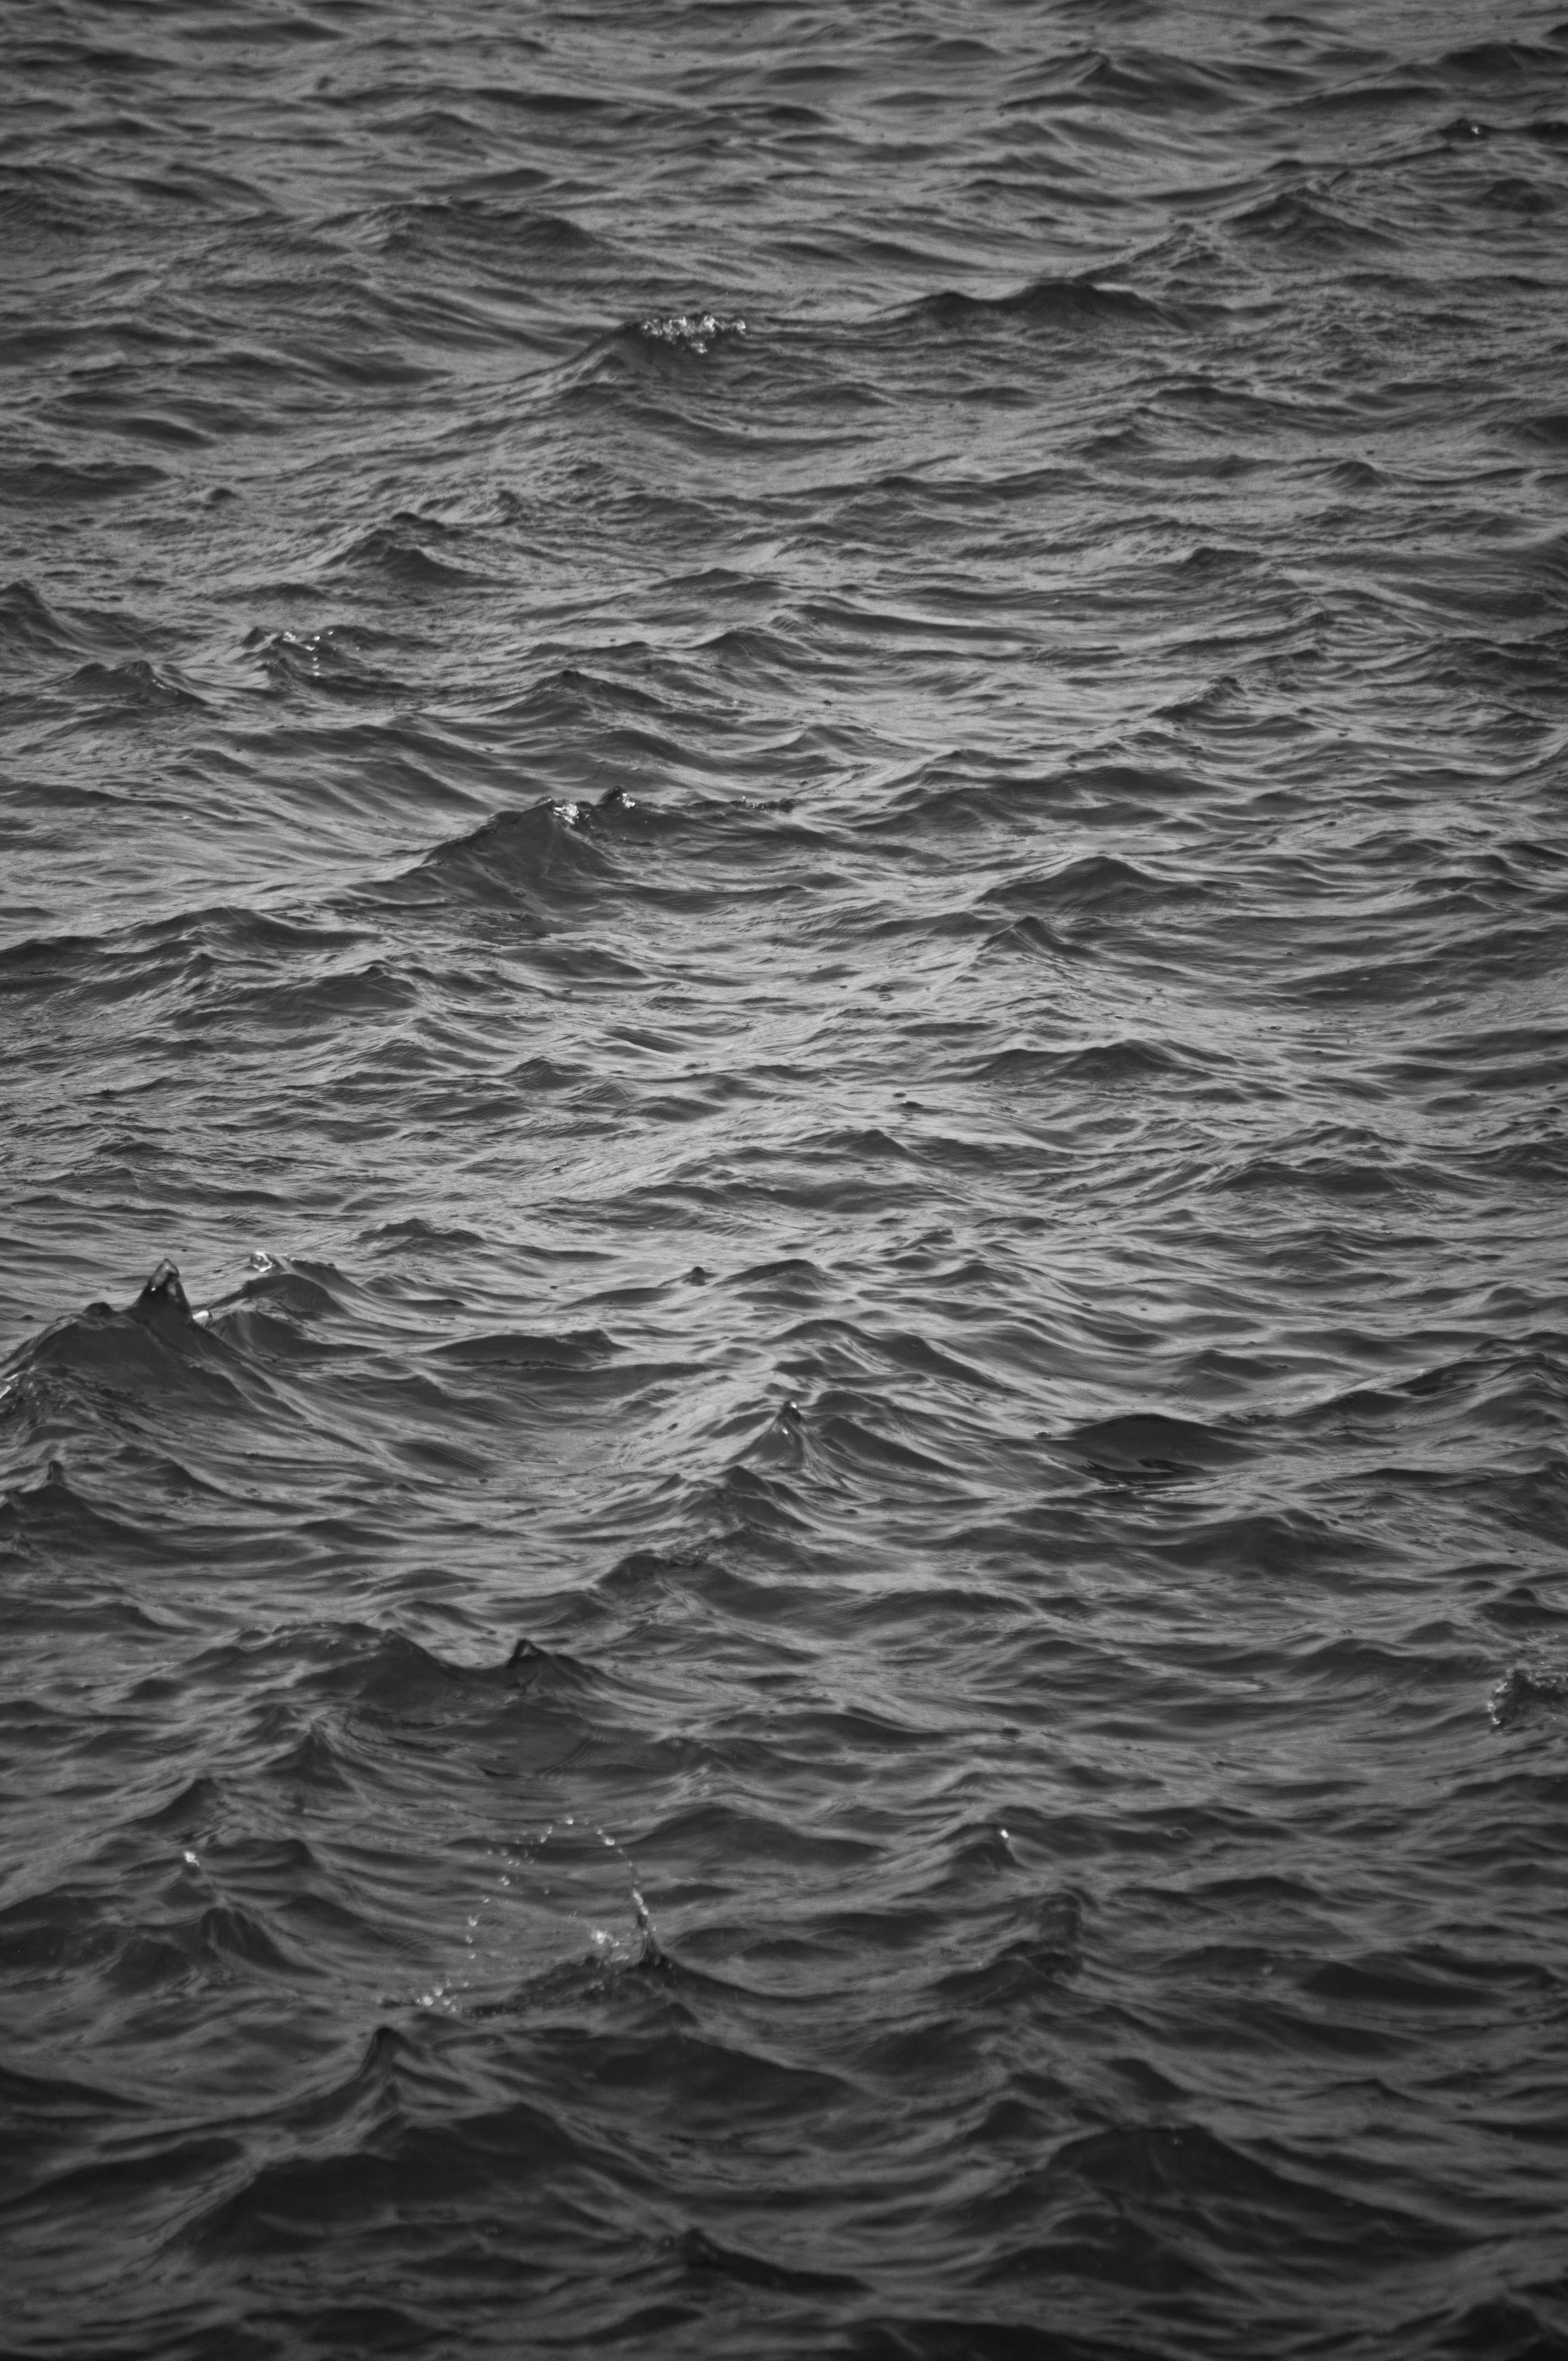 ripples, ripple, nature, water, waves, bw, chb cellphone